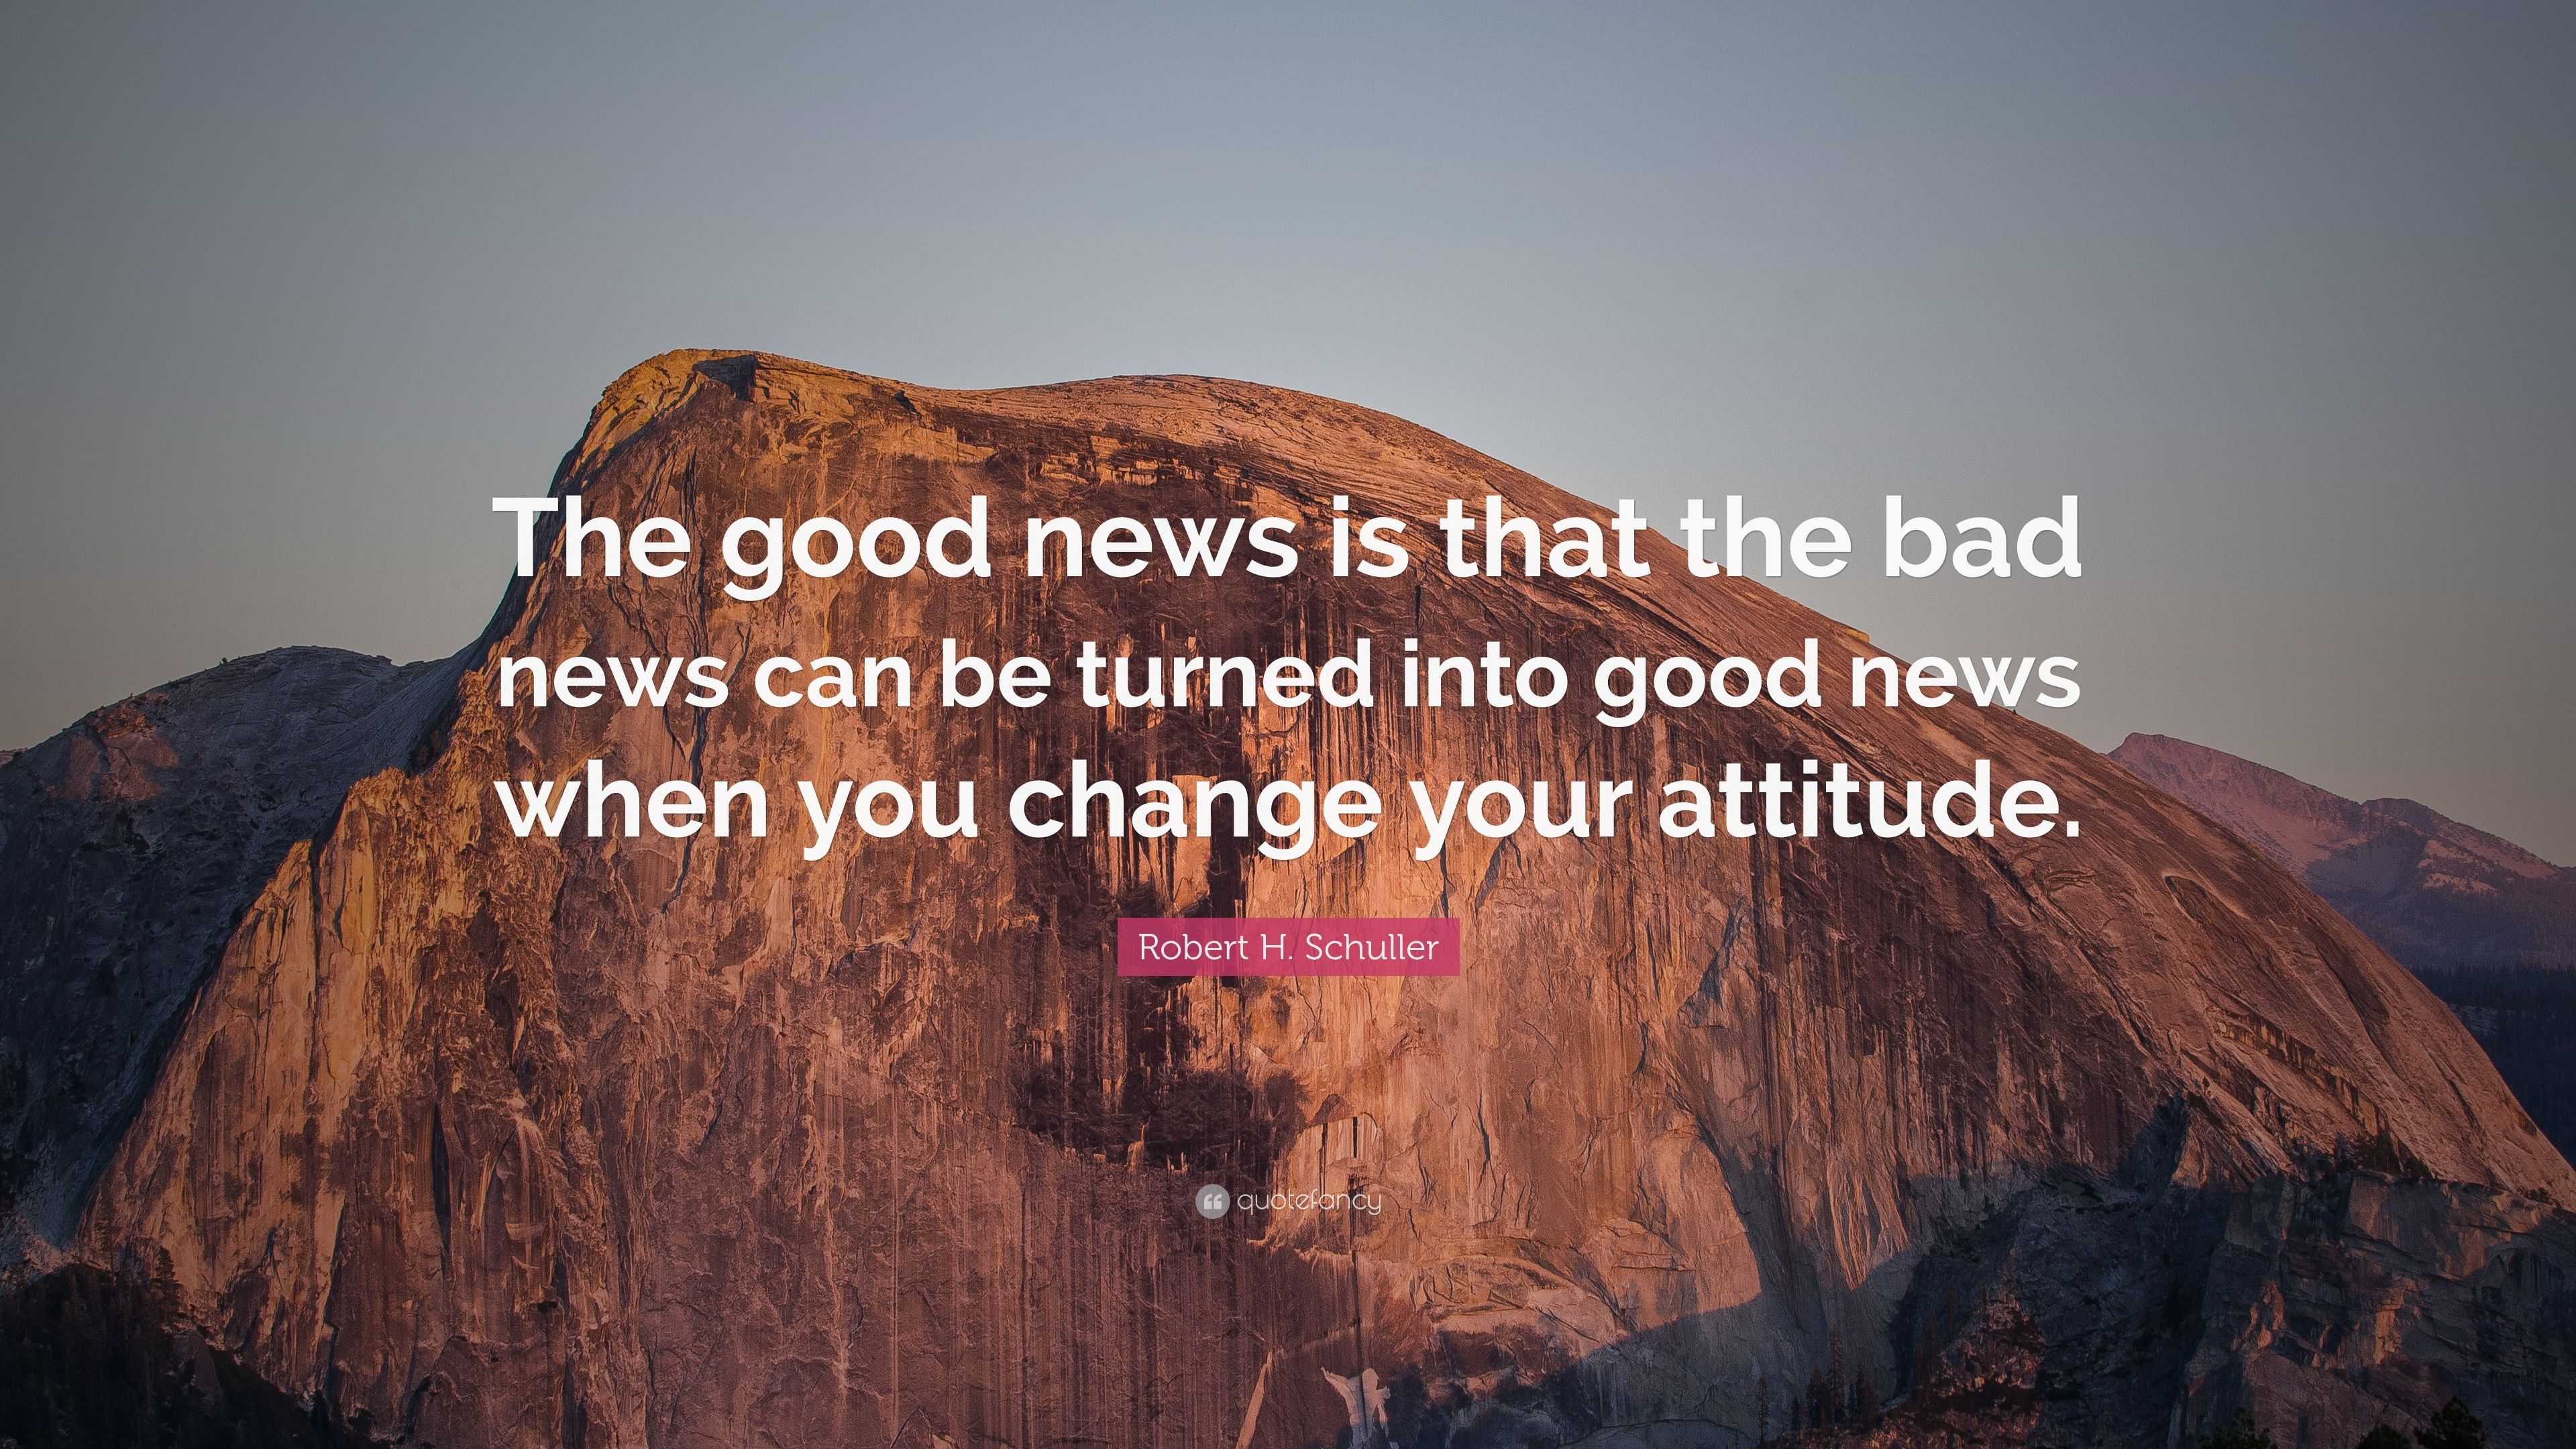 Robert H. Schuller Quote: “The good news is that the bad news can be